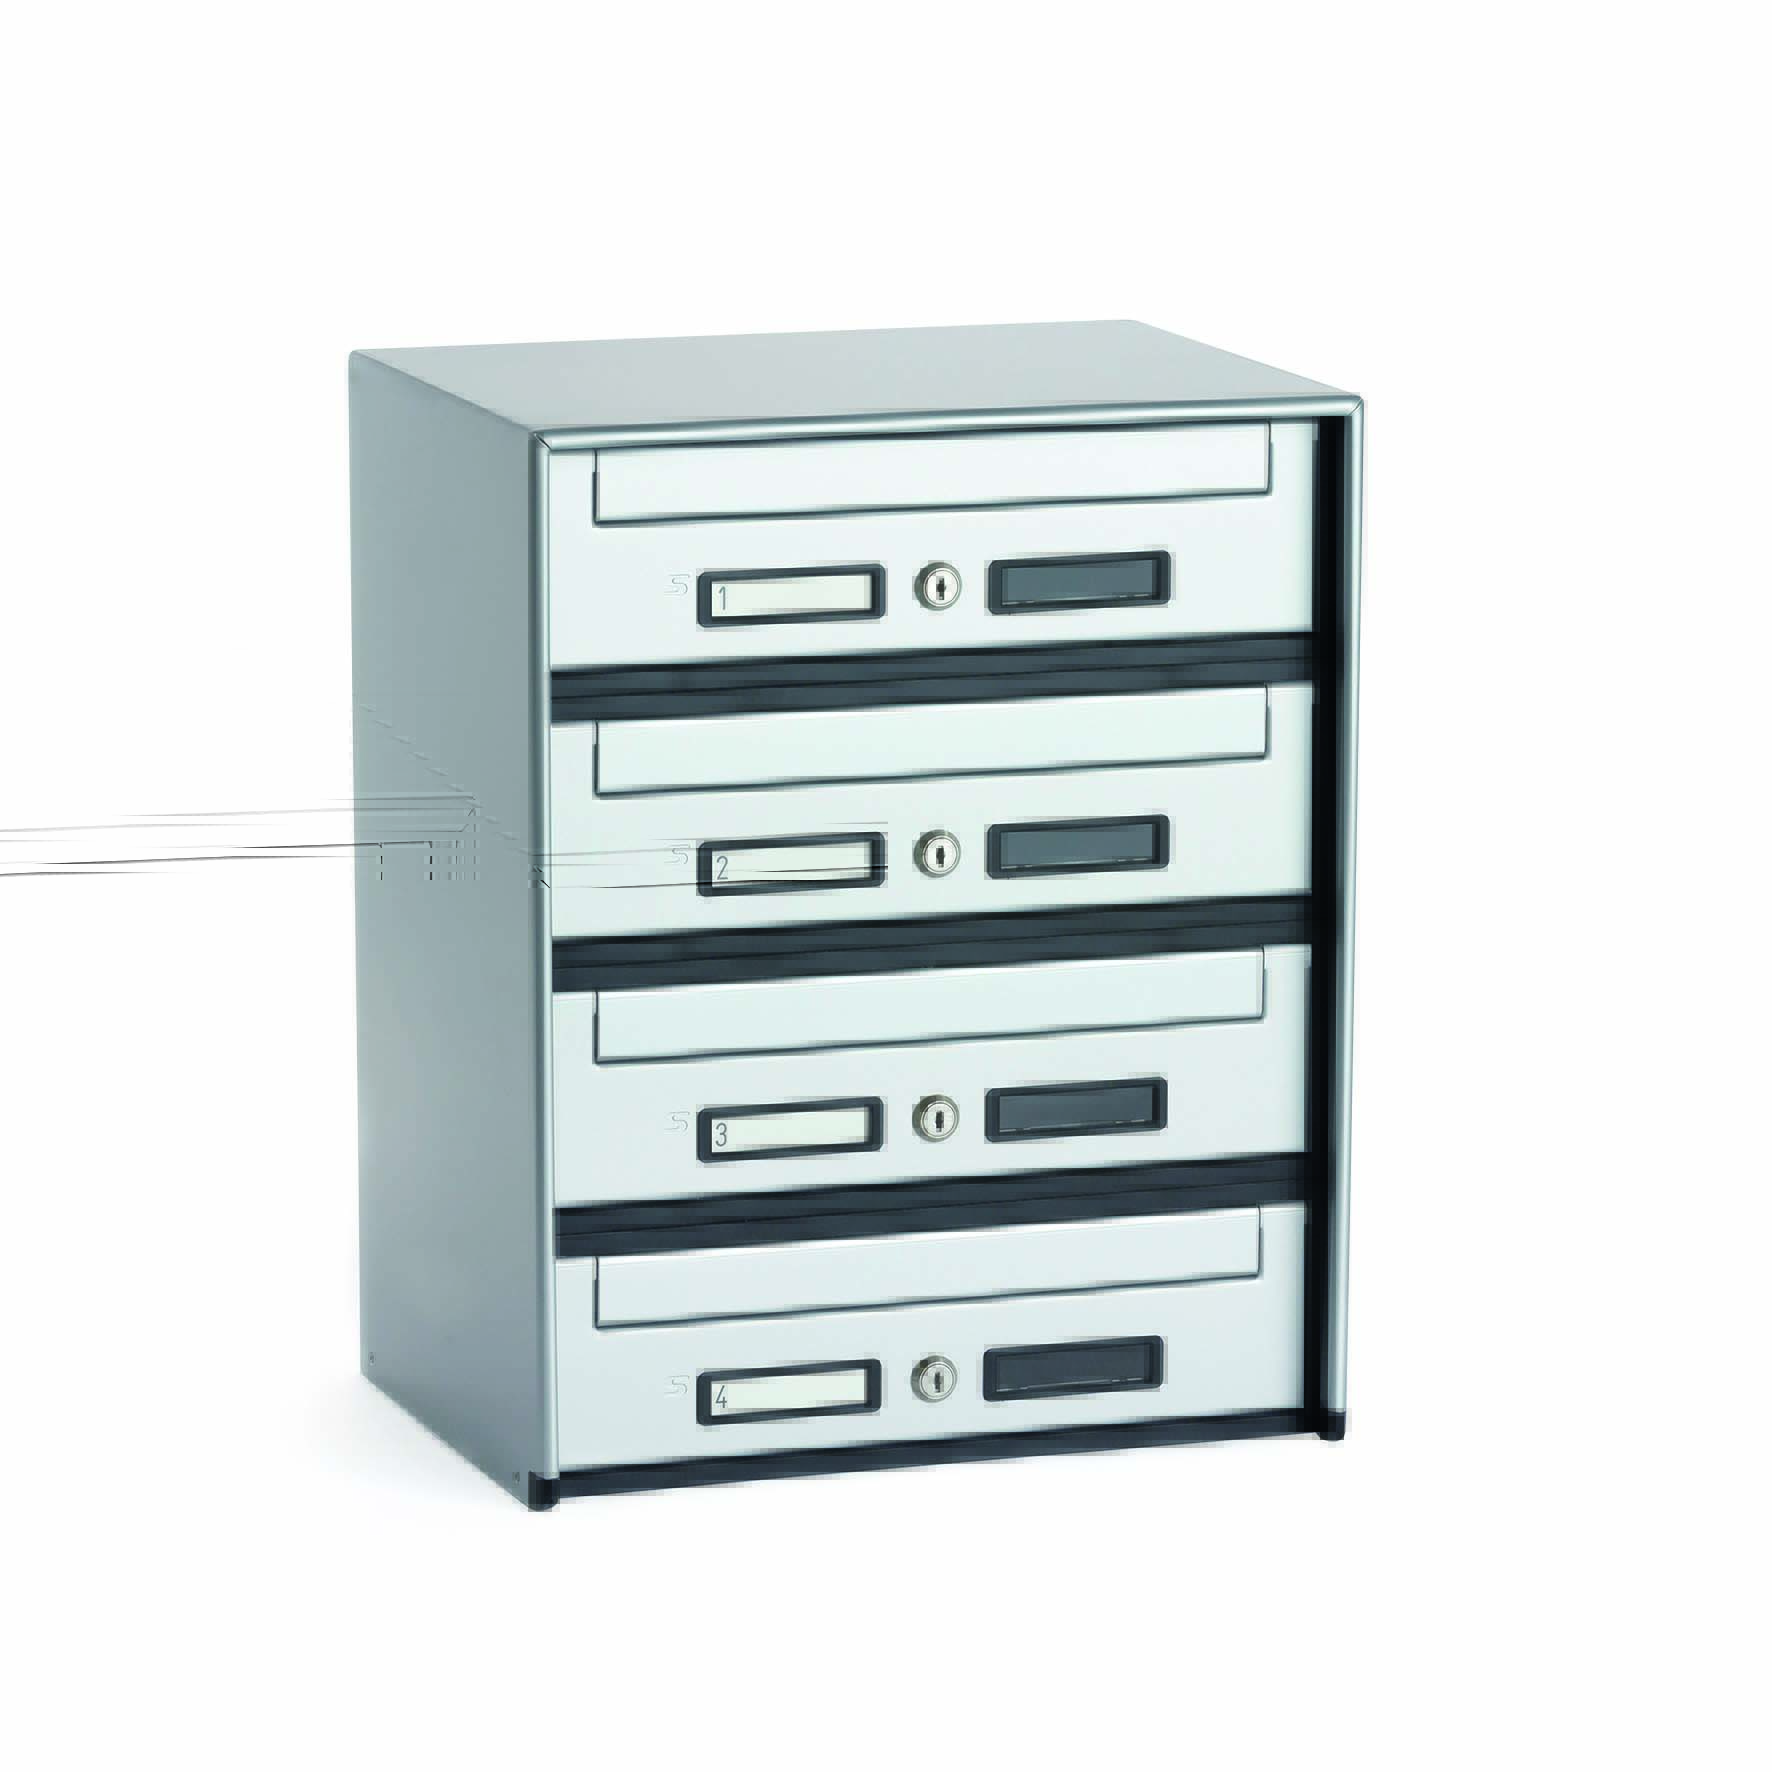 SC5 standard modular letterbox units with front mail collection 8 mailboxes